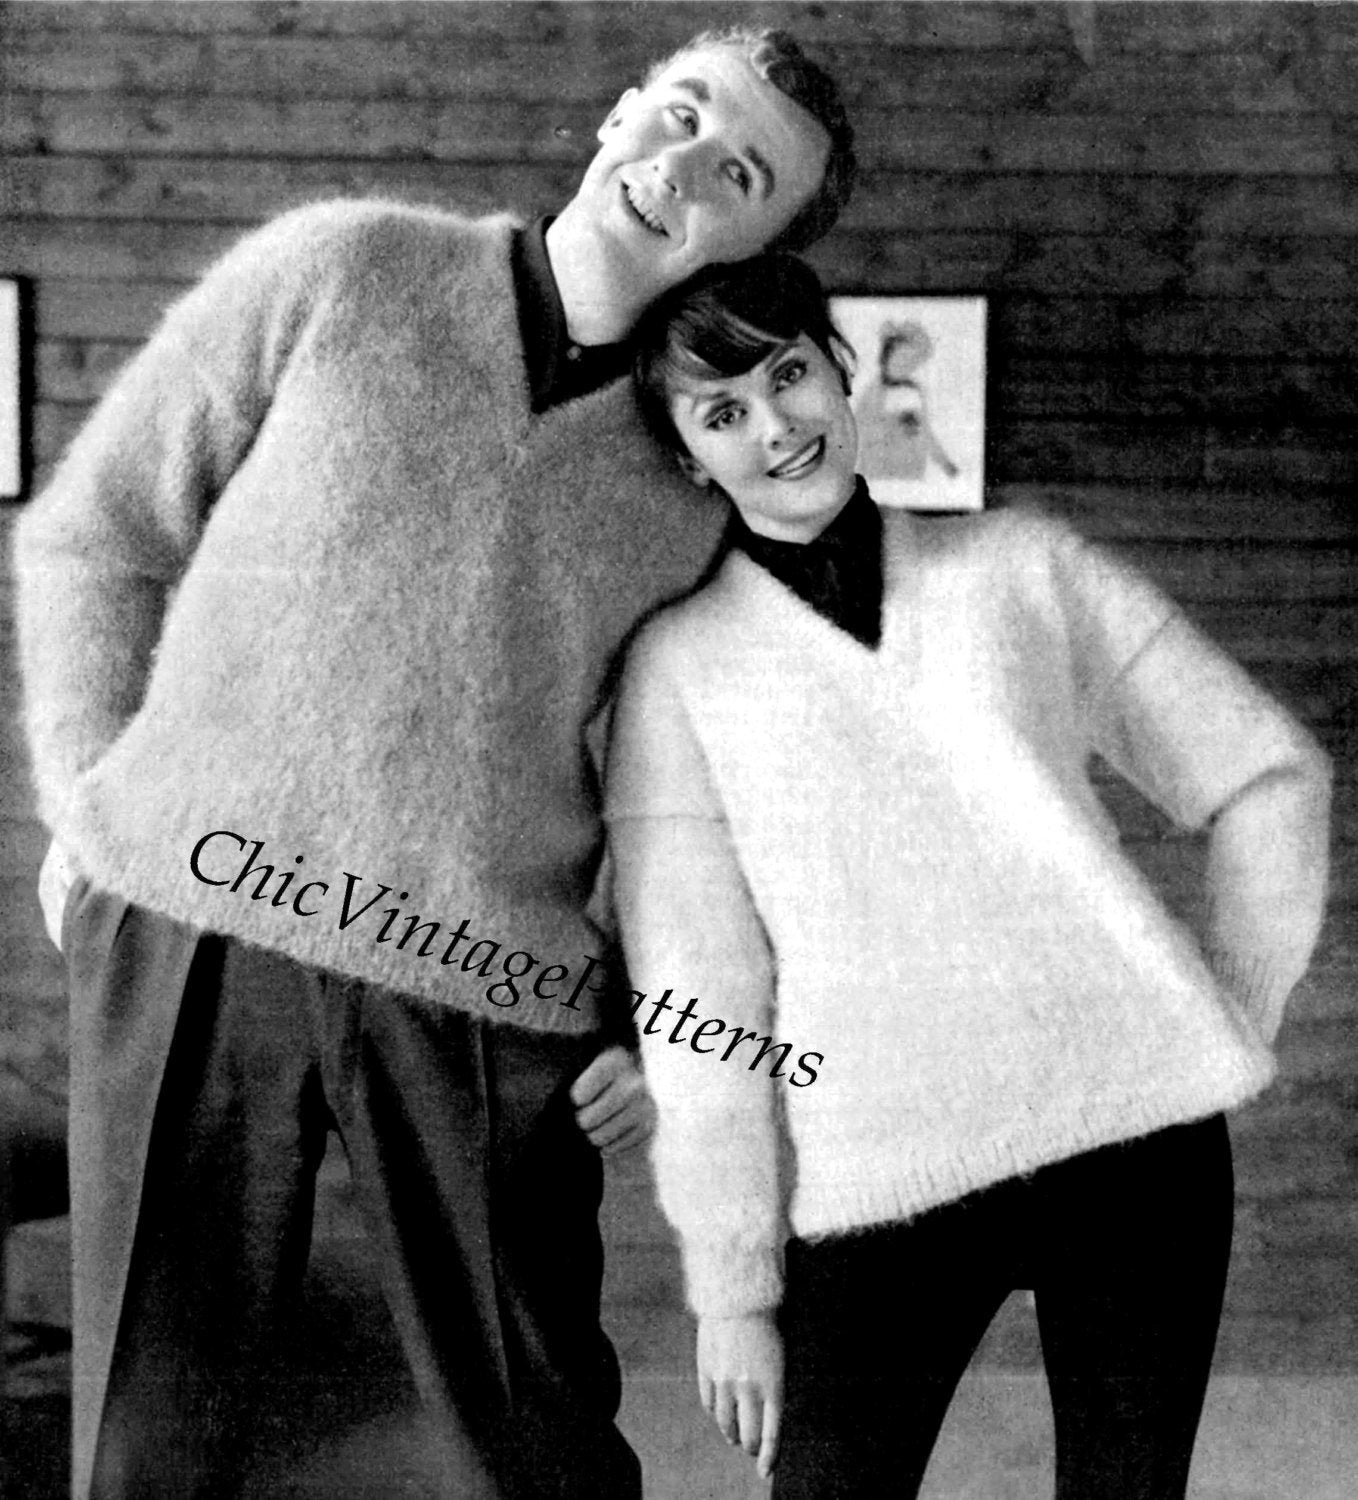 Knitted Sweaters, His & Her Mohair Jumper Pattern, Instant Download